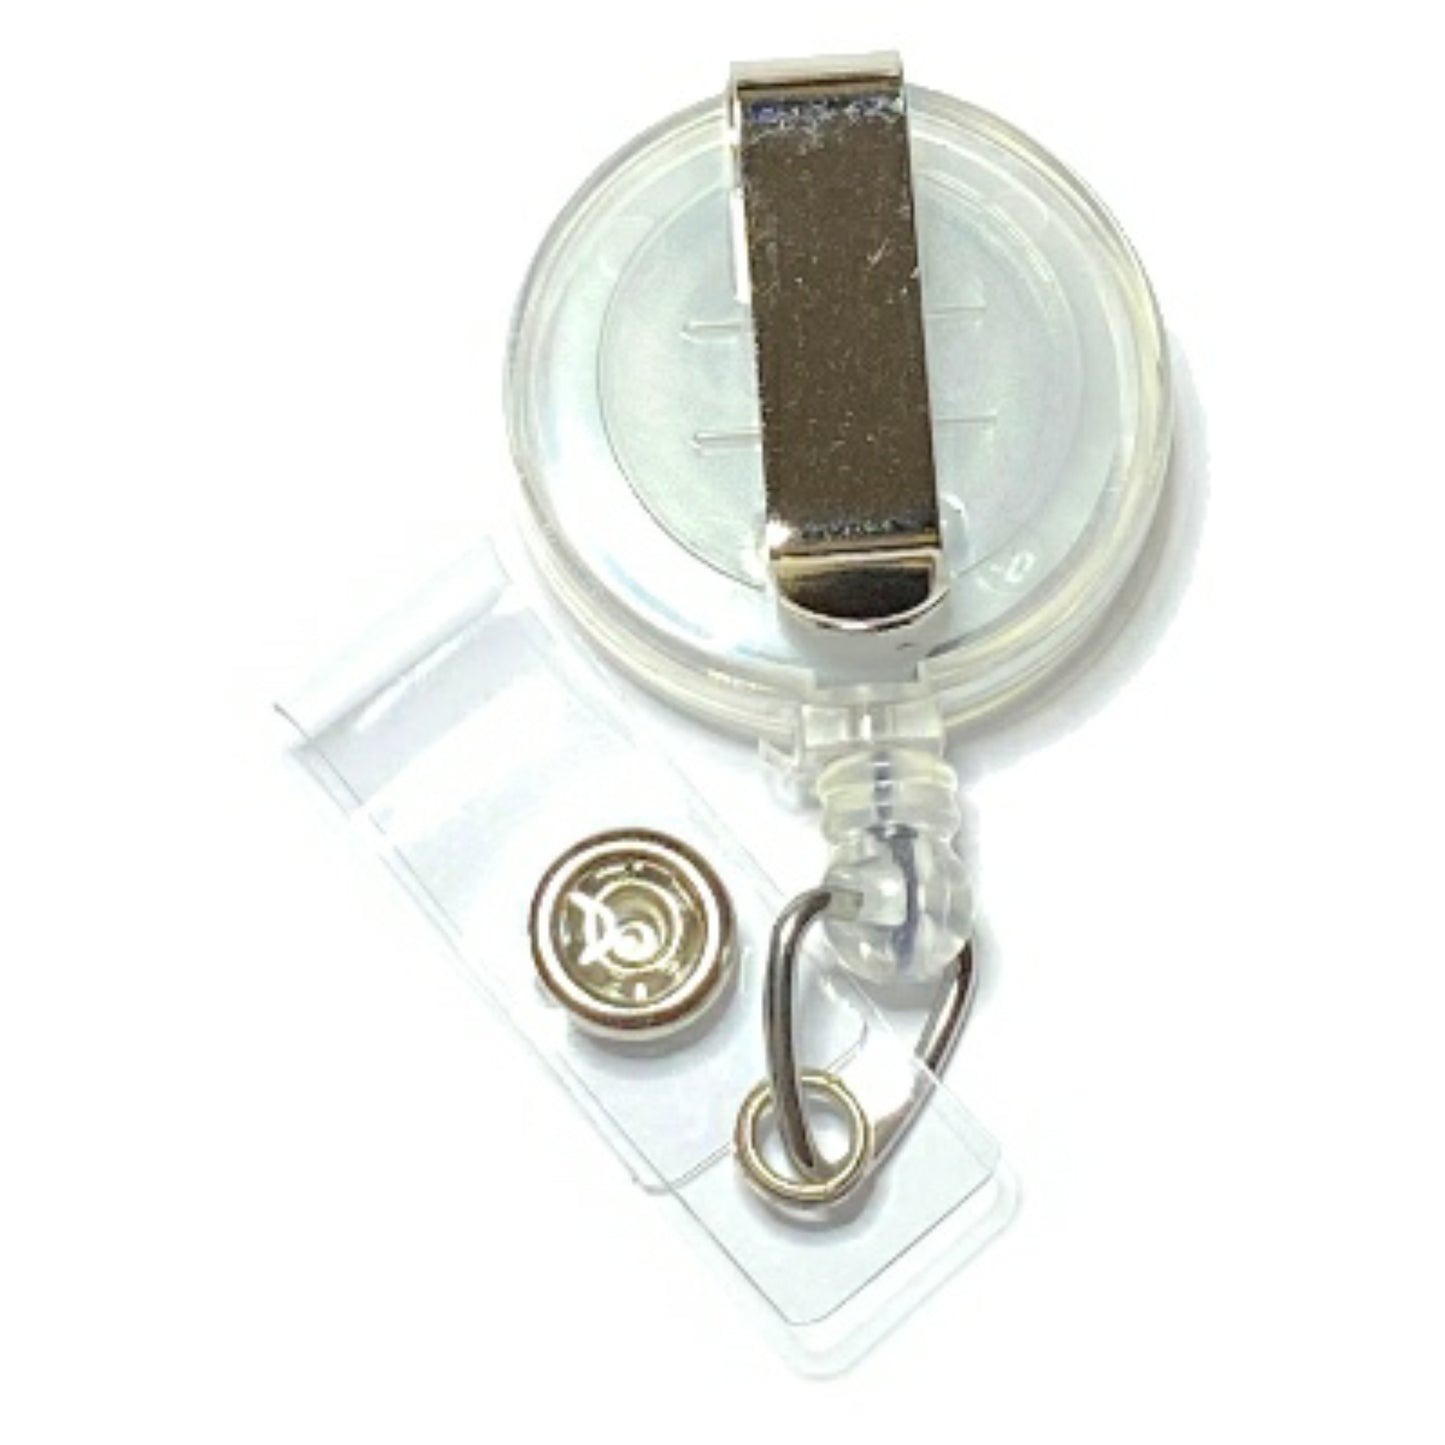 Curly Hair Masked Nurse (4 choices) Retractable ID Badge Reel Holder